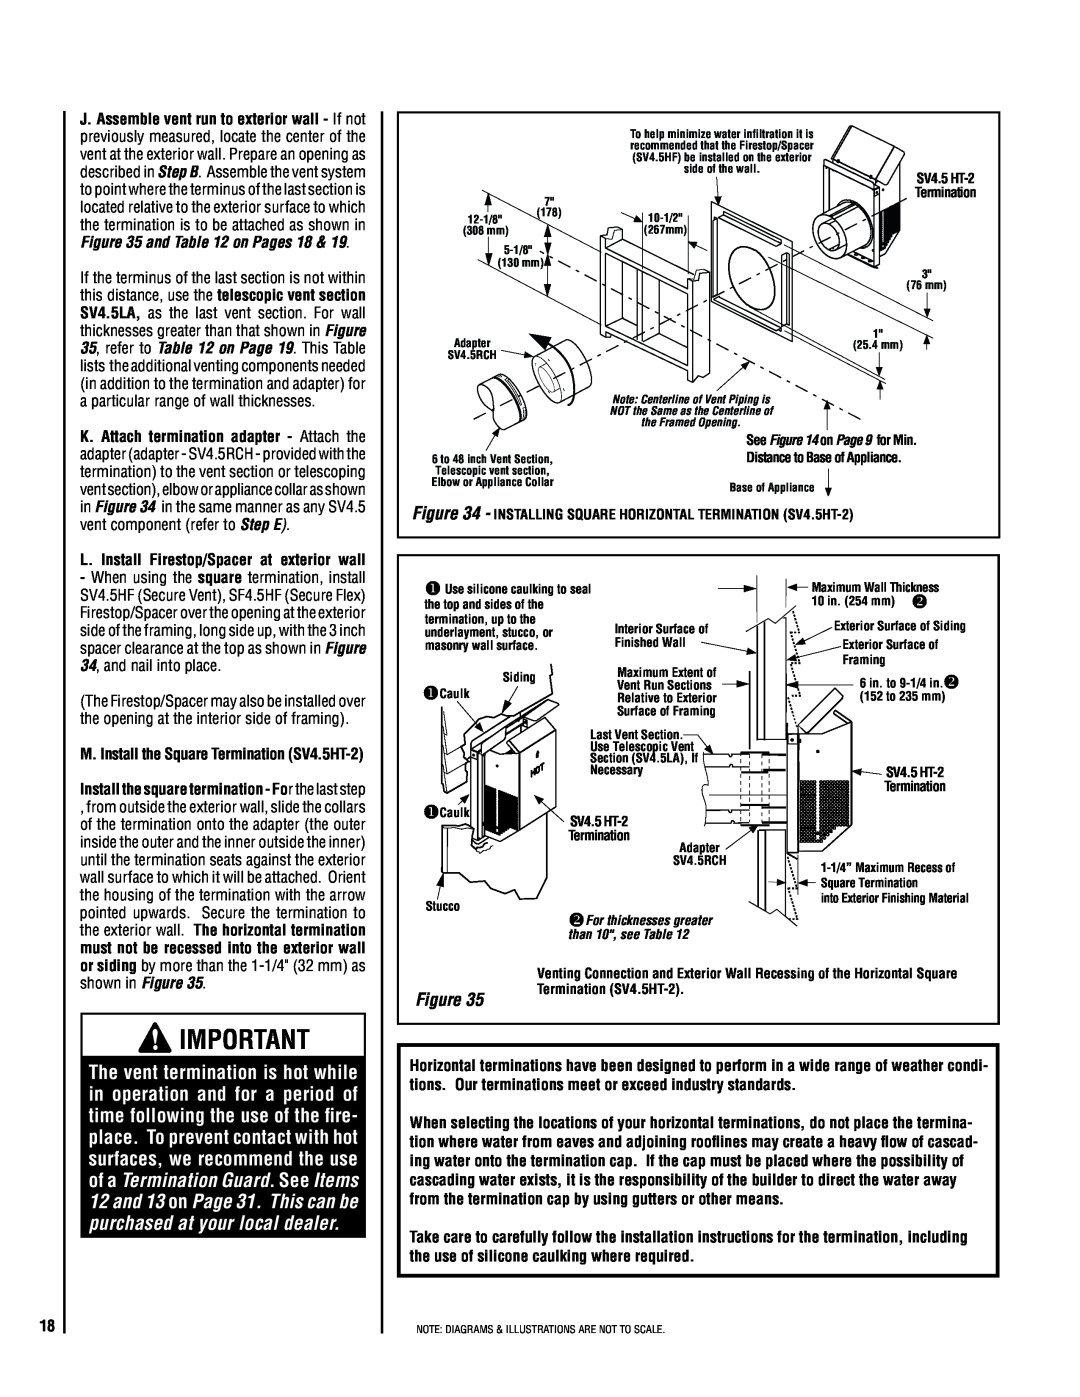 Lennox Hearth LMDVT-3328-CNE and on Pages, L. Install Firestop/Spacer at exterior wall, See on Page 9 for Min 